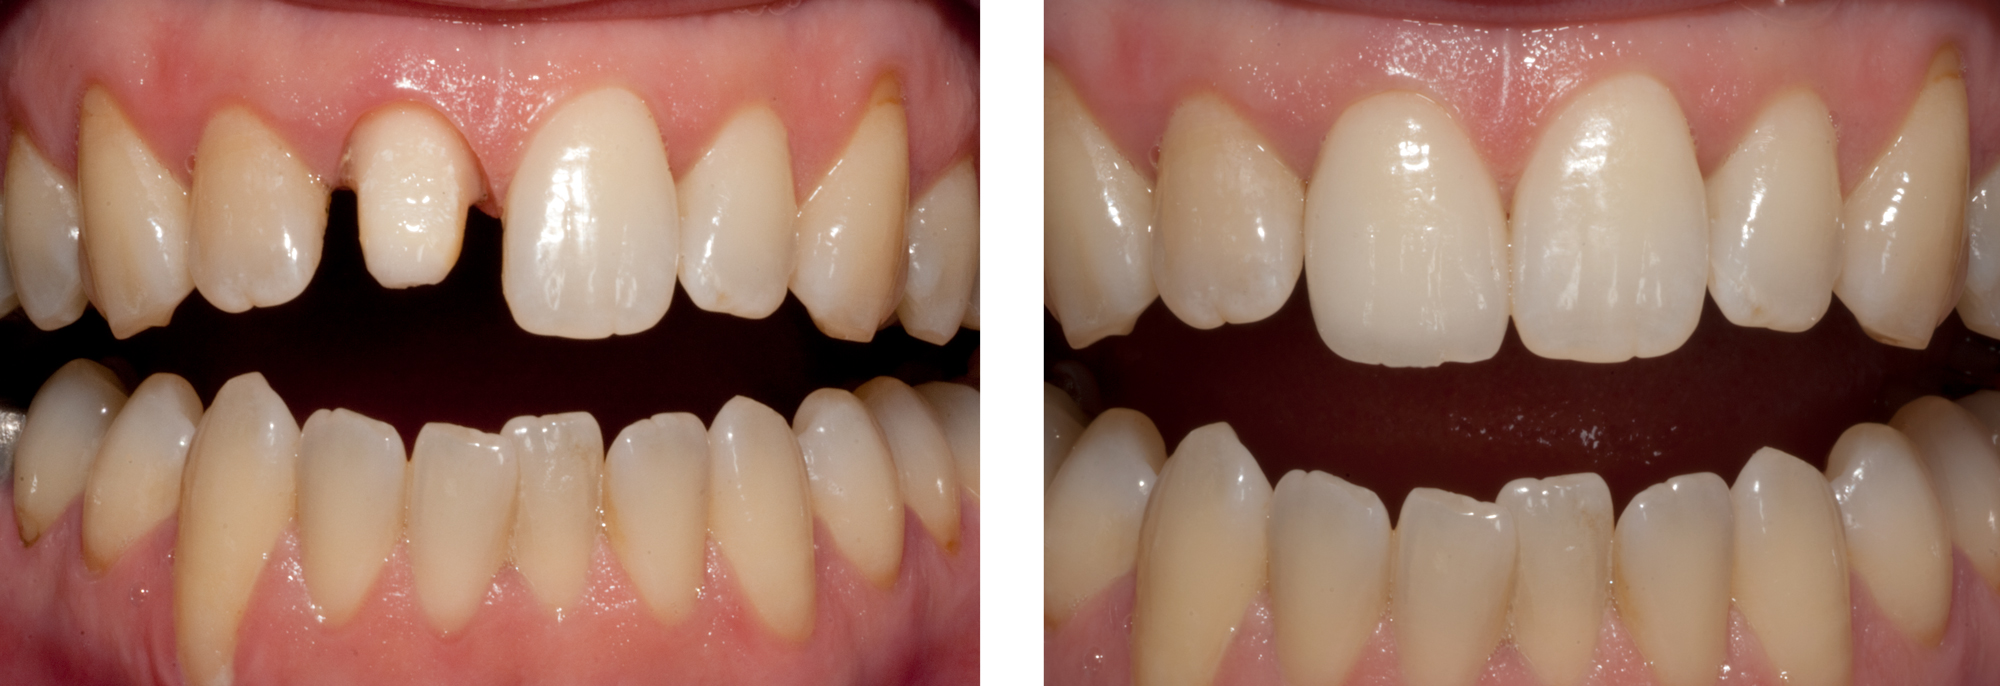 Single-Front Tooth By Ron Winter of Fabulous Teeth @ Seaside Dental Laboratory $ Clinic Takapuna Auckland New Zealand.jpg